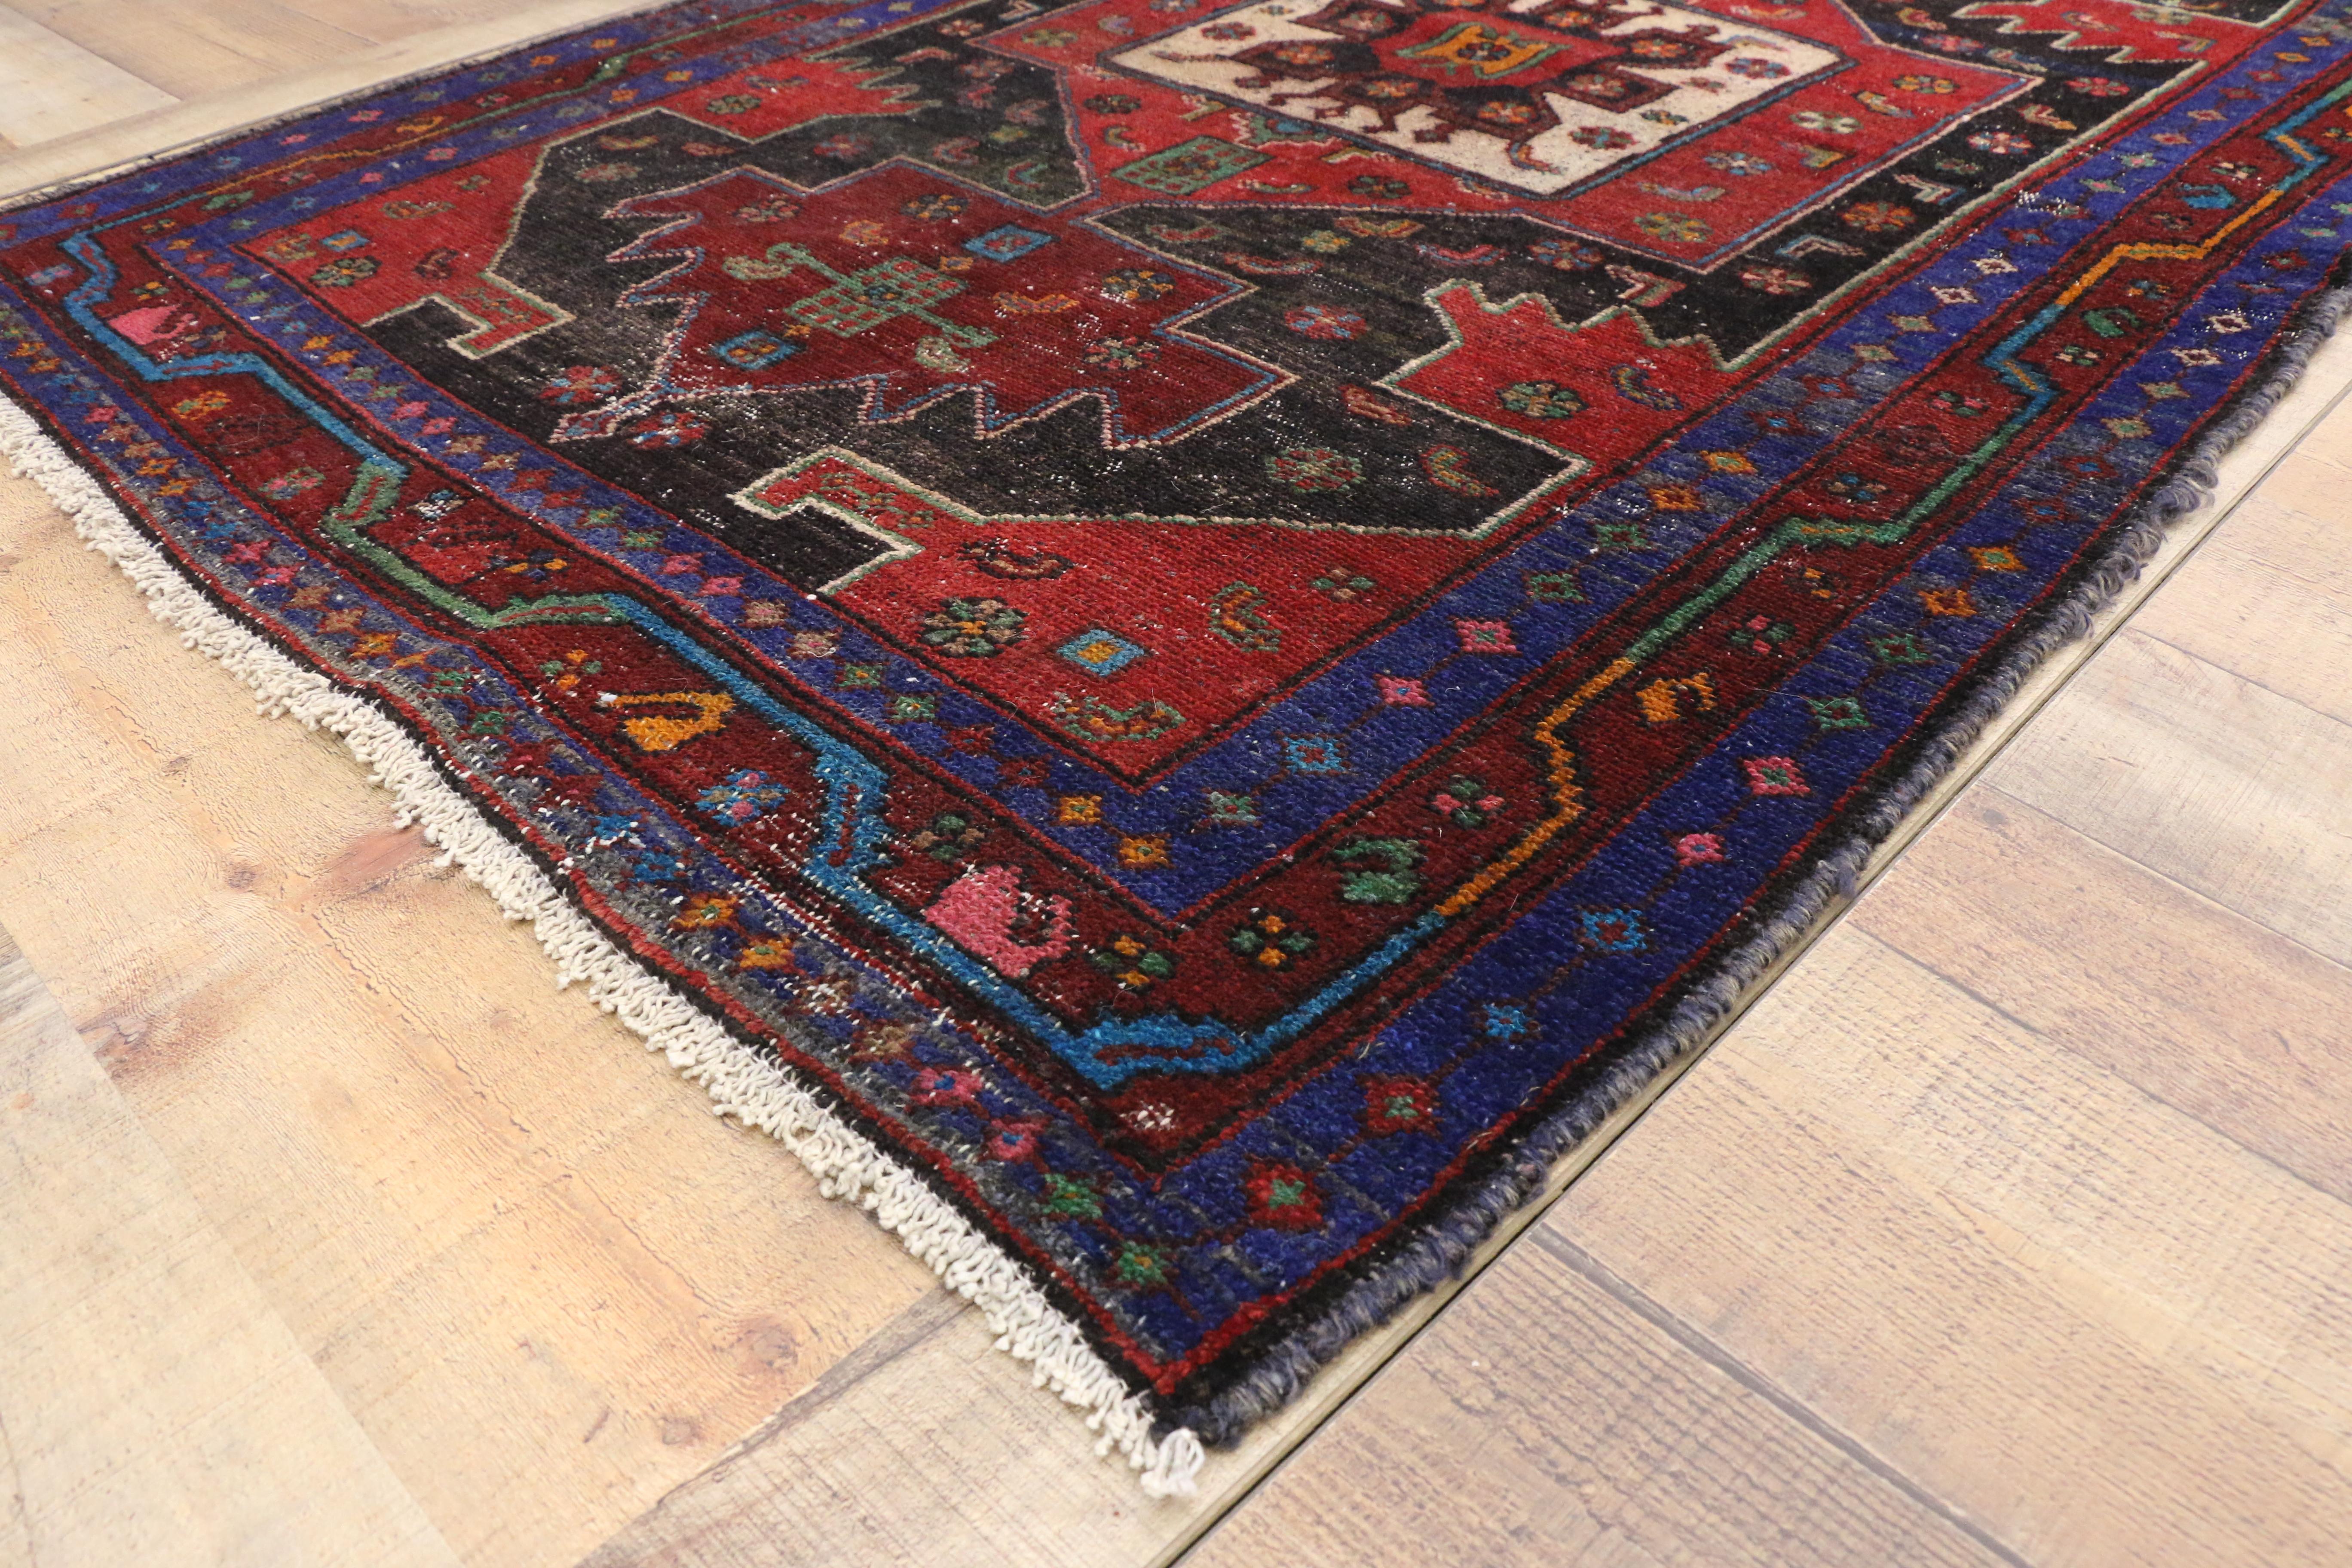 51578, vintage Persian Hamadan rug with modern Tribal style. Full of character and stately presence, this vintage Persian Hamadan rug with modern tribal style showcases a geometric design rendered in variegated shades of black, red, blue and beige